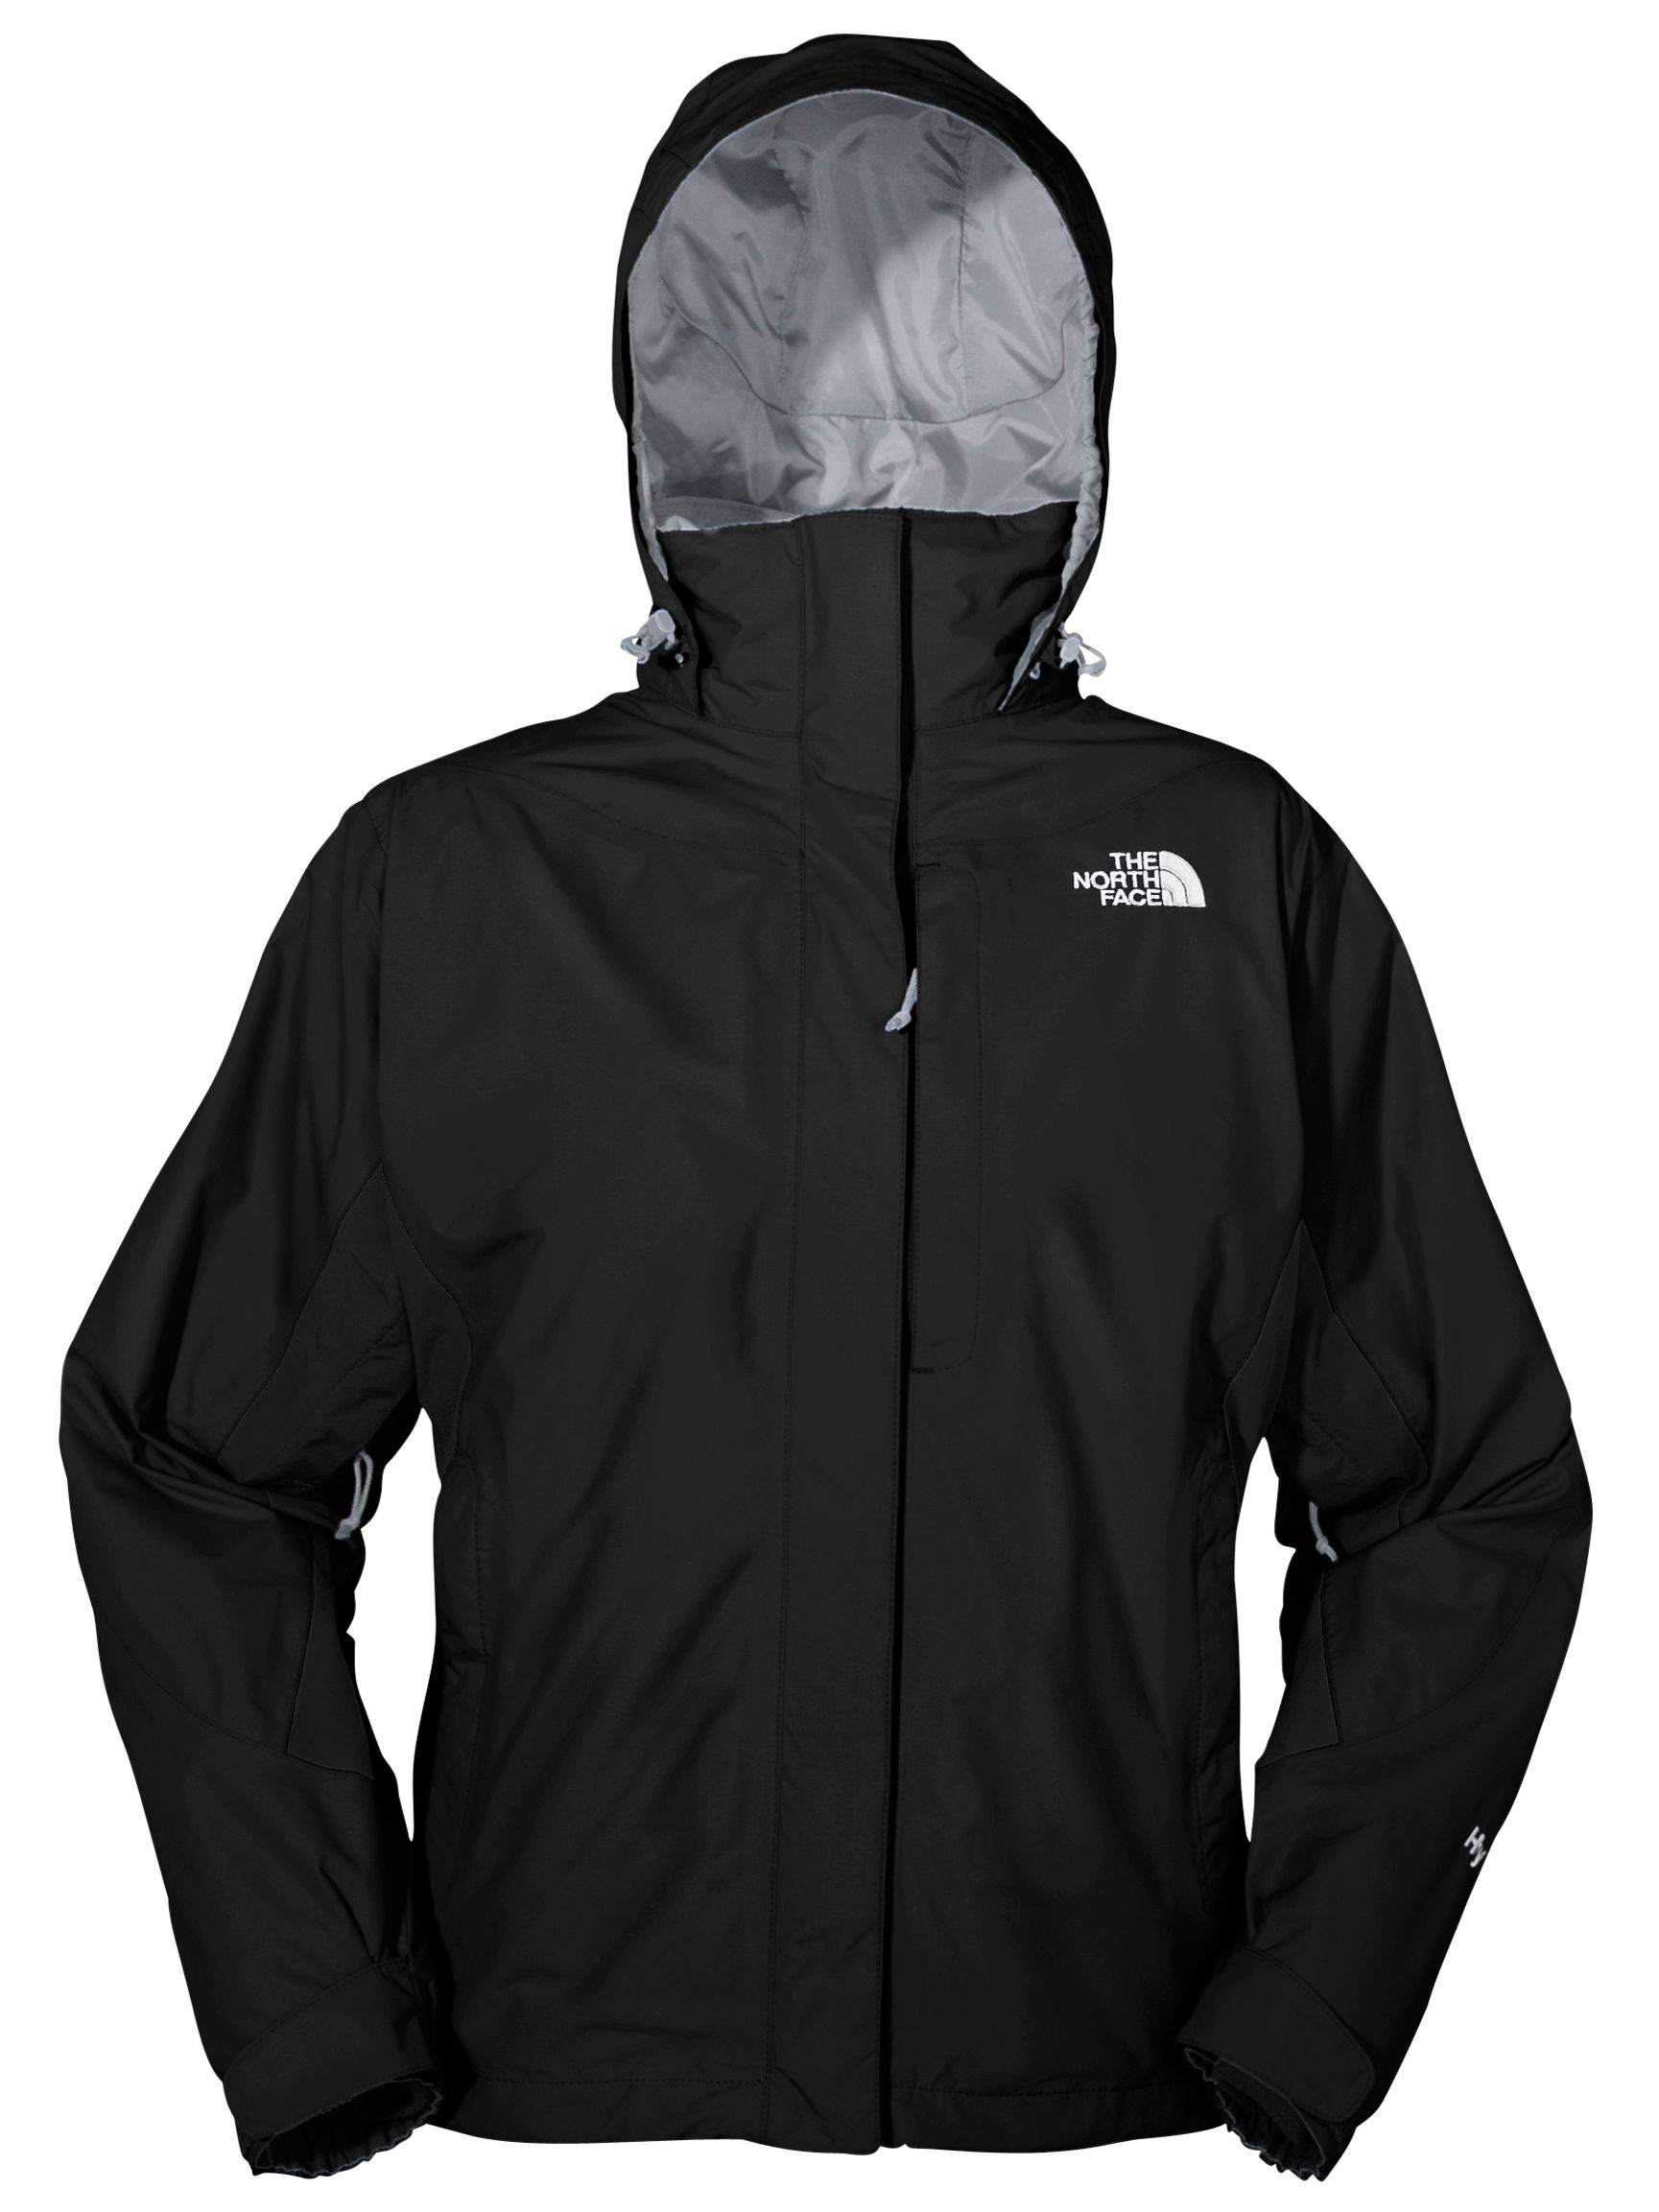 The North Face Women's Evolution Triclimate Jacket, Black at John Lewis